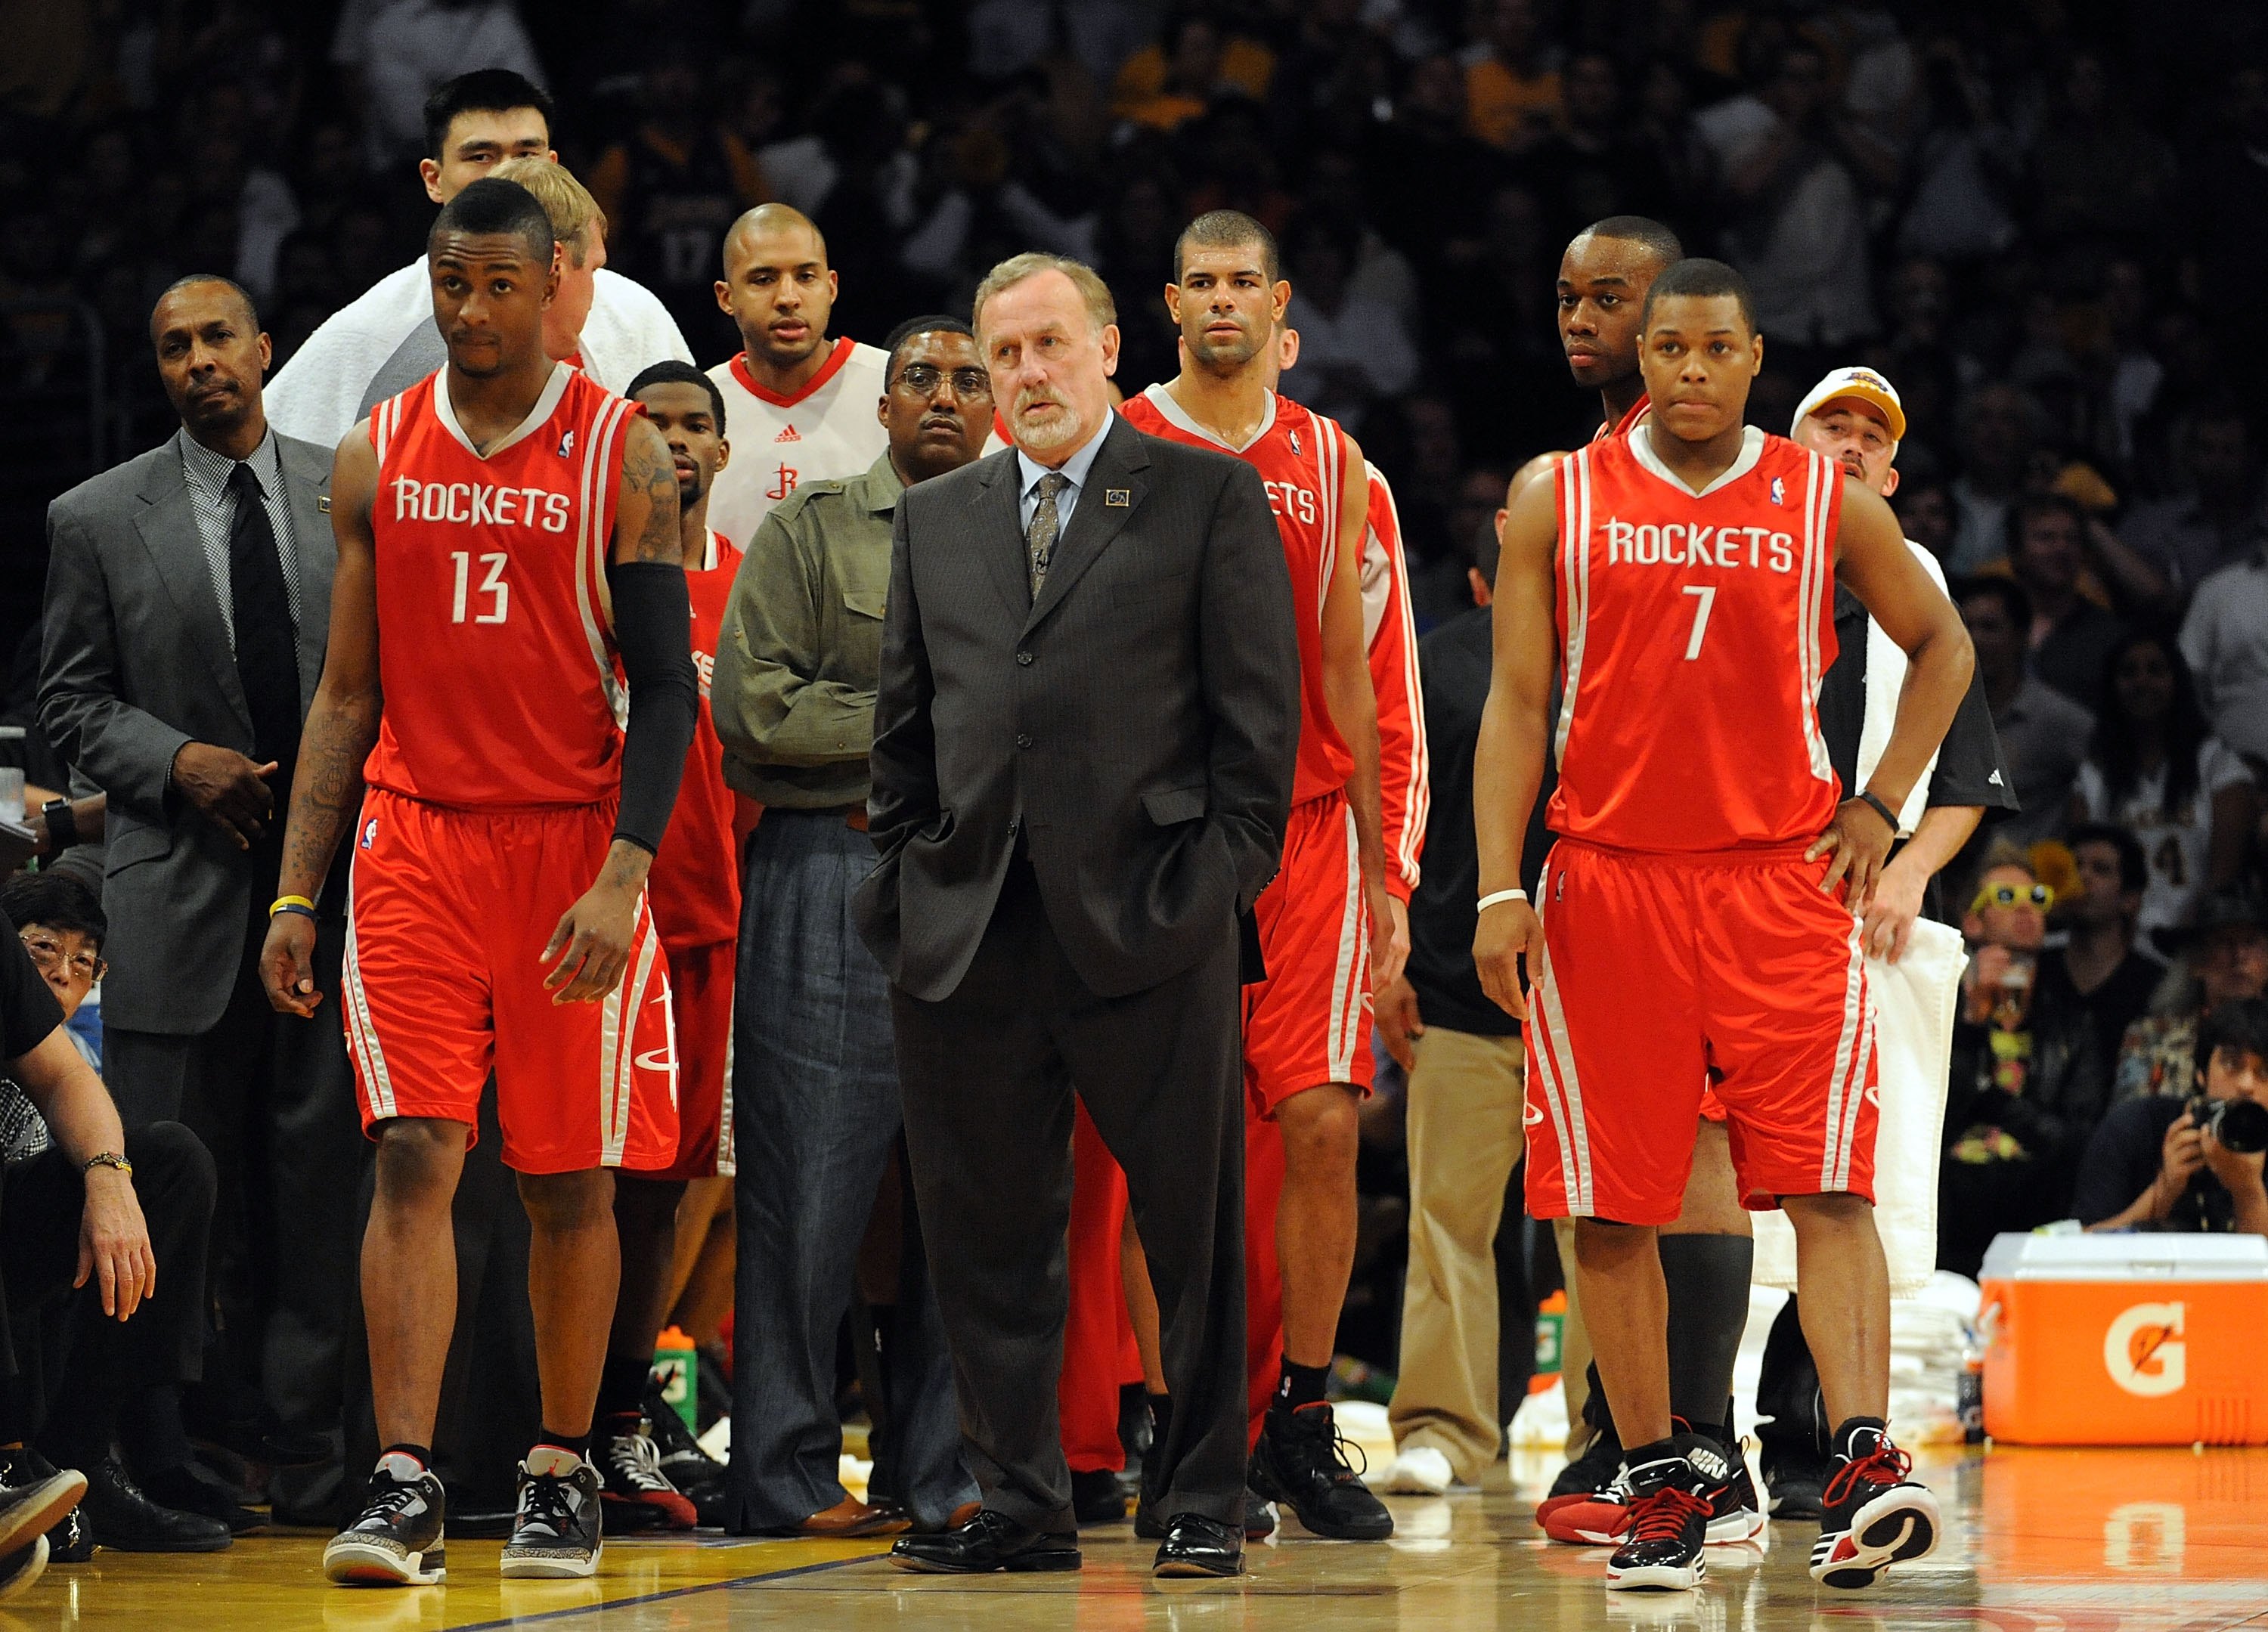 LOS ANGELES, CA - MAY 06:  Head coach Rick Adelman and the Houston Rockets bench stand against the Los Angeles Lakers in Game Two of the Western Conference Semifinals during the 2009 NBA Playoffs at Staples Center on May 6, 2009 in Los Angeles, California